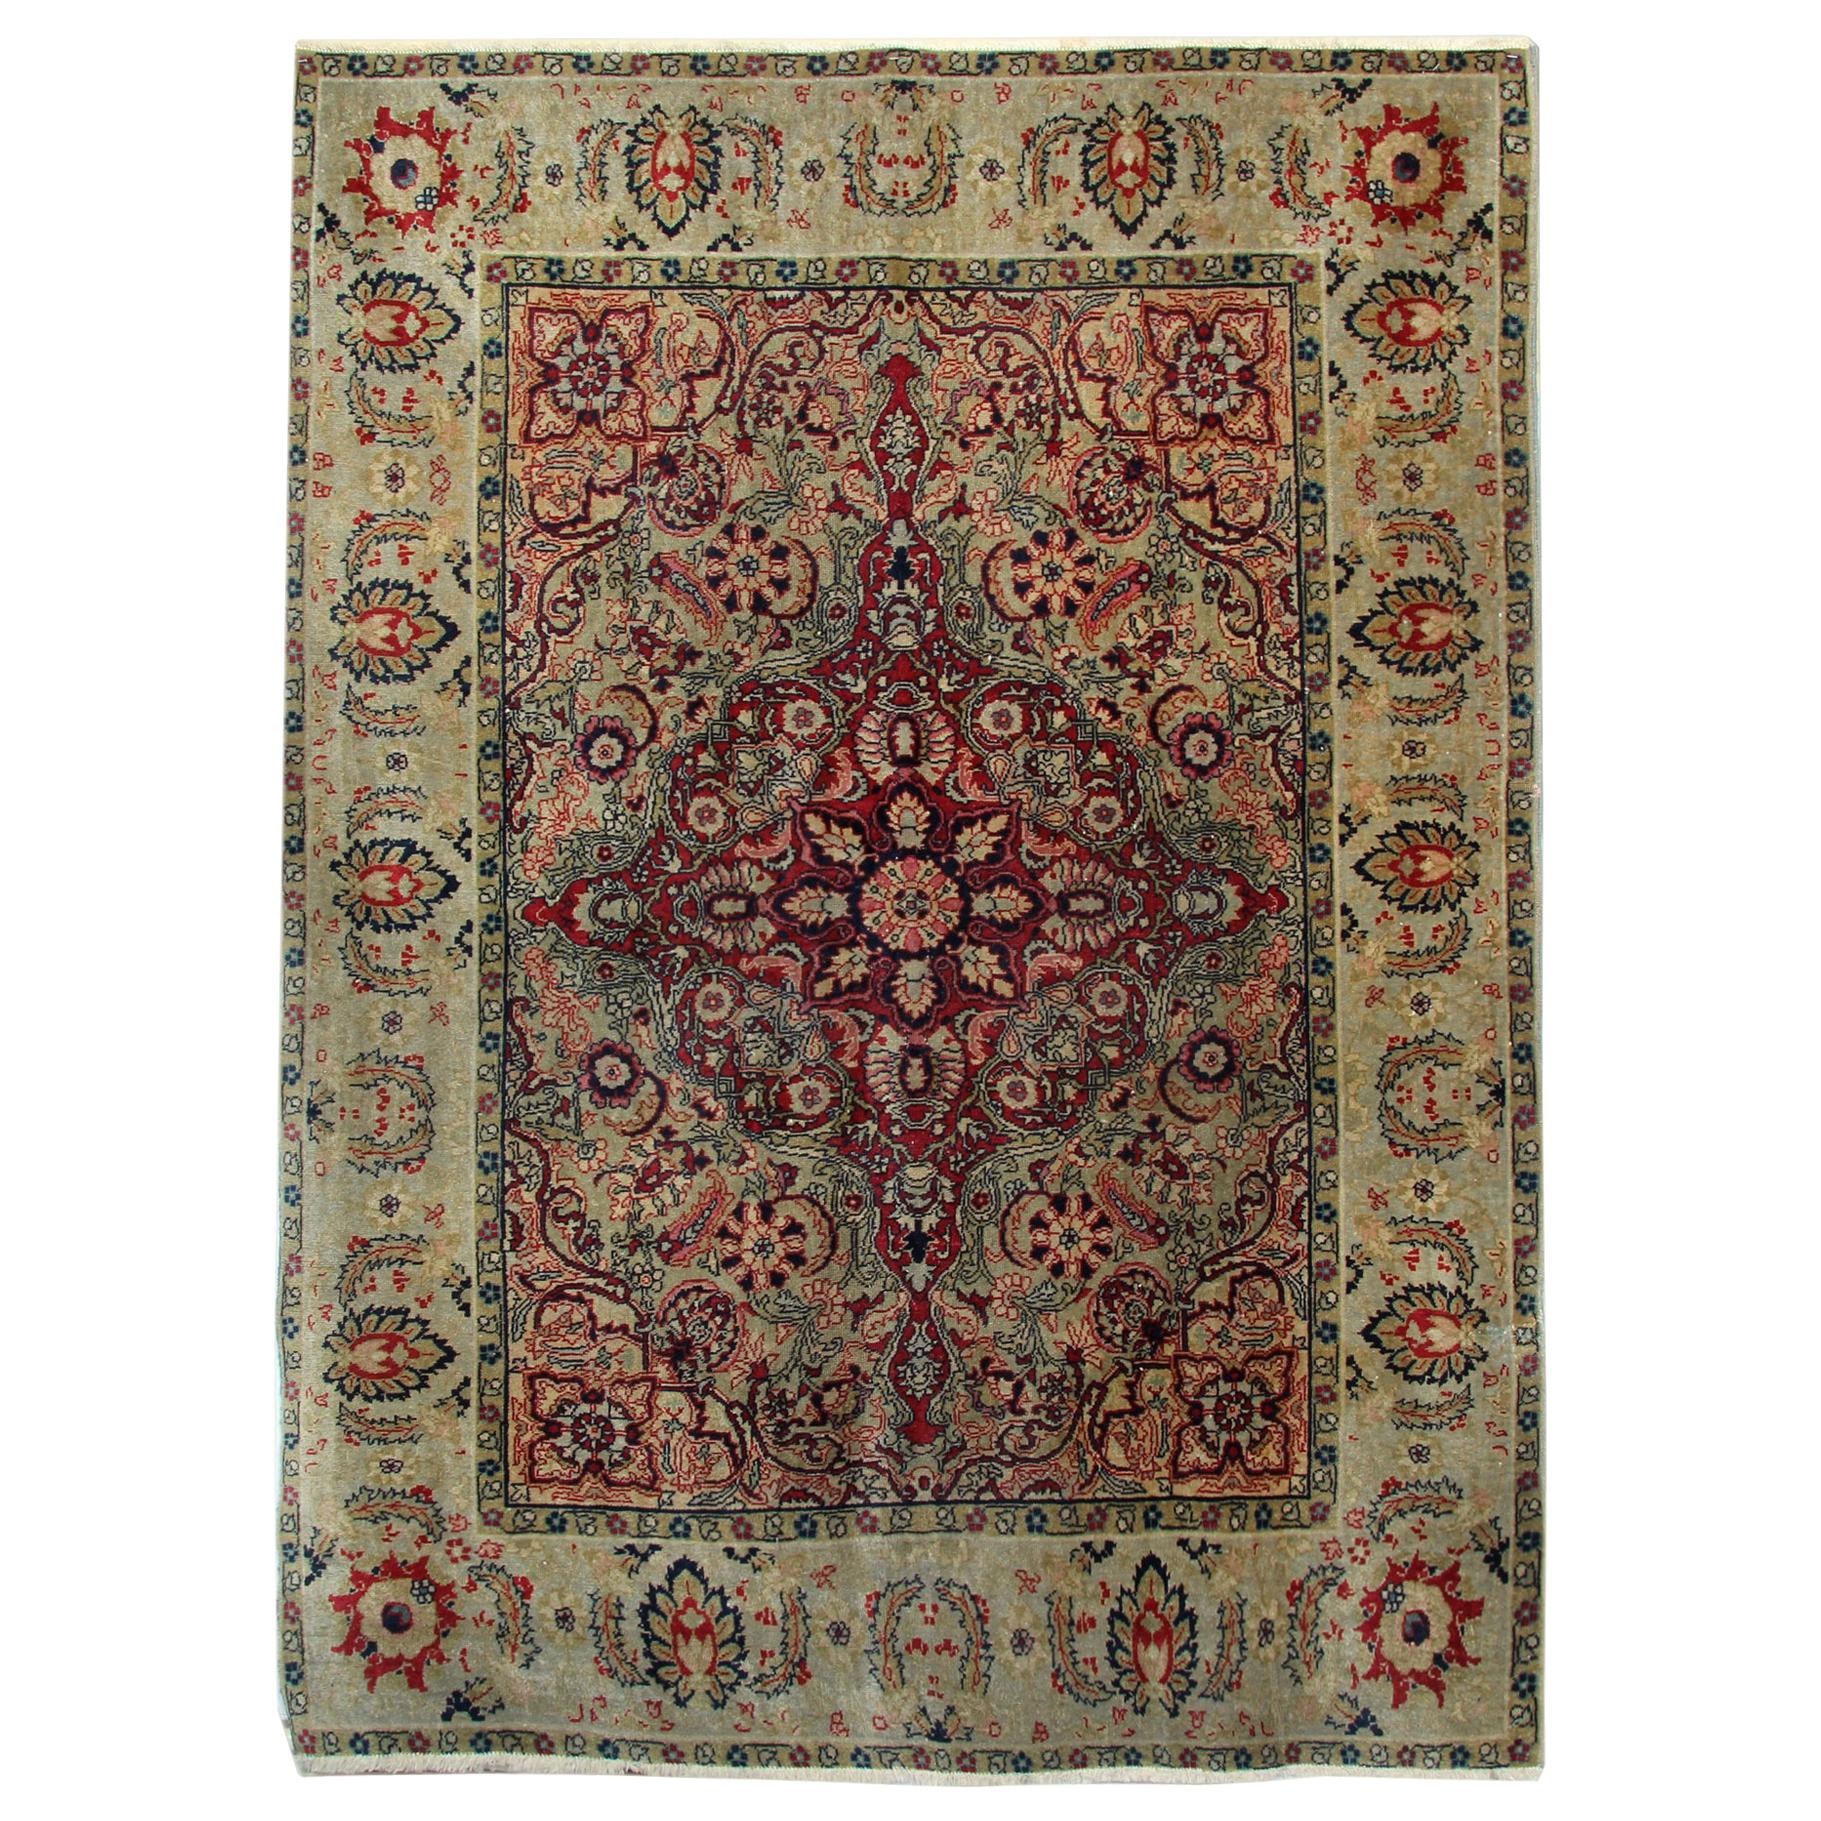 Handmade Carpet Antique Rugs, Agra Indian Rug, luxury Red Oriental Rugs for Sale For Sale